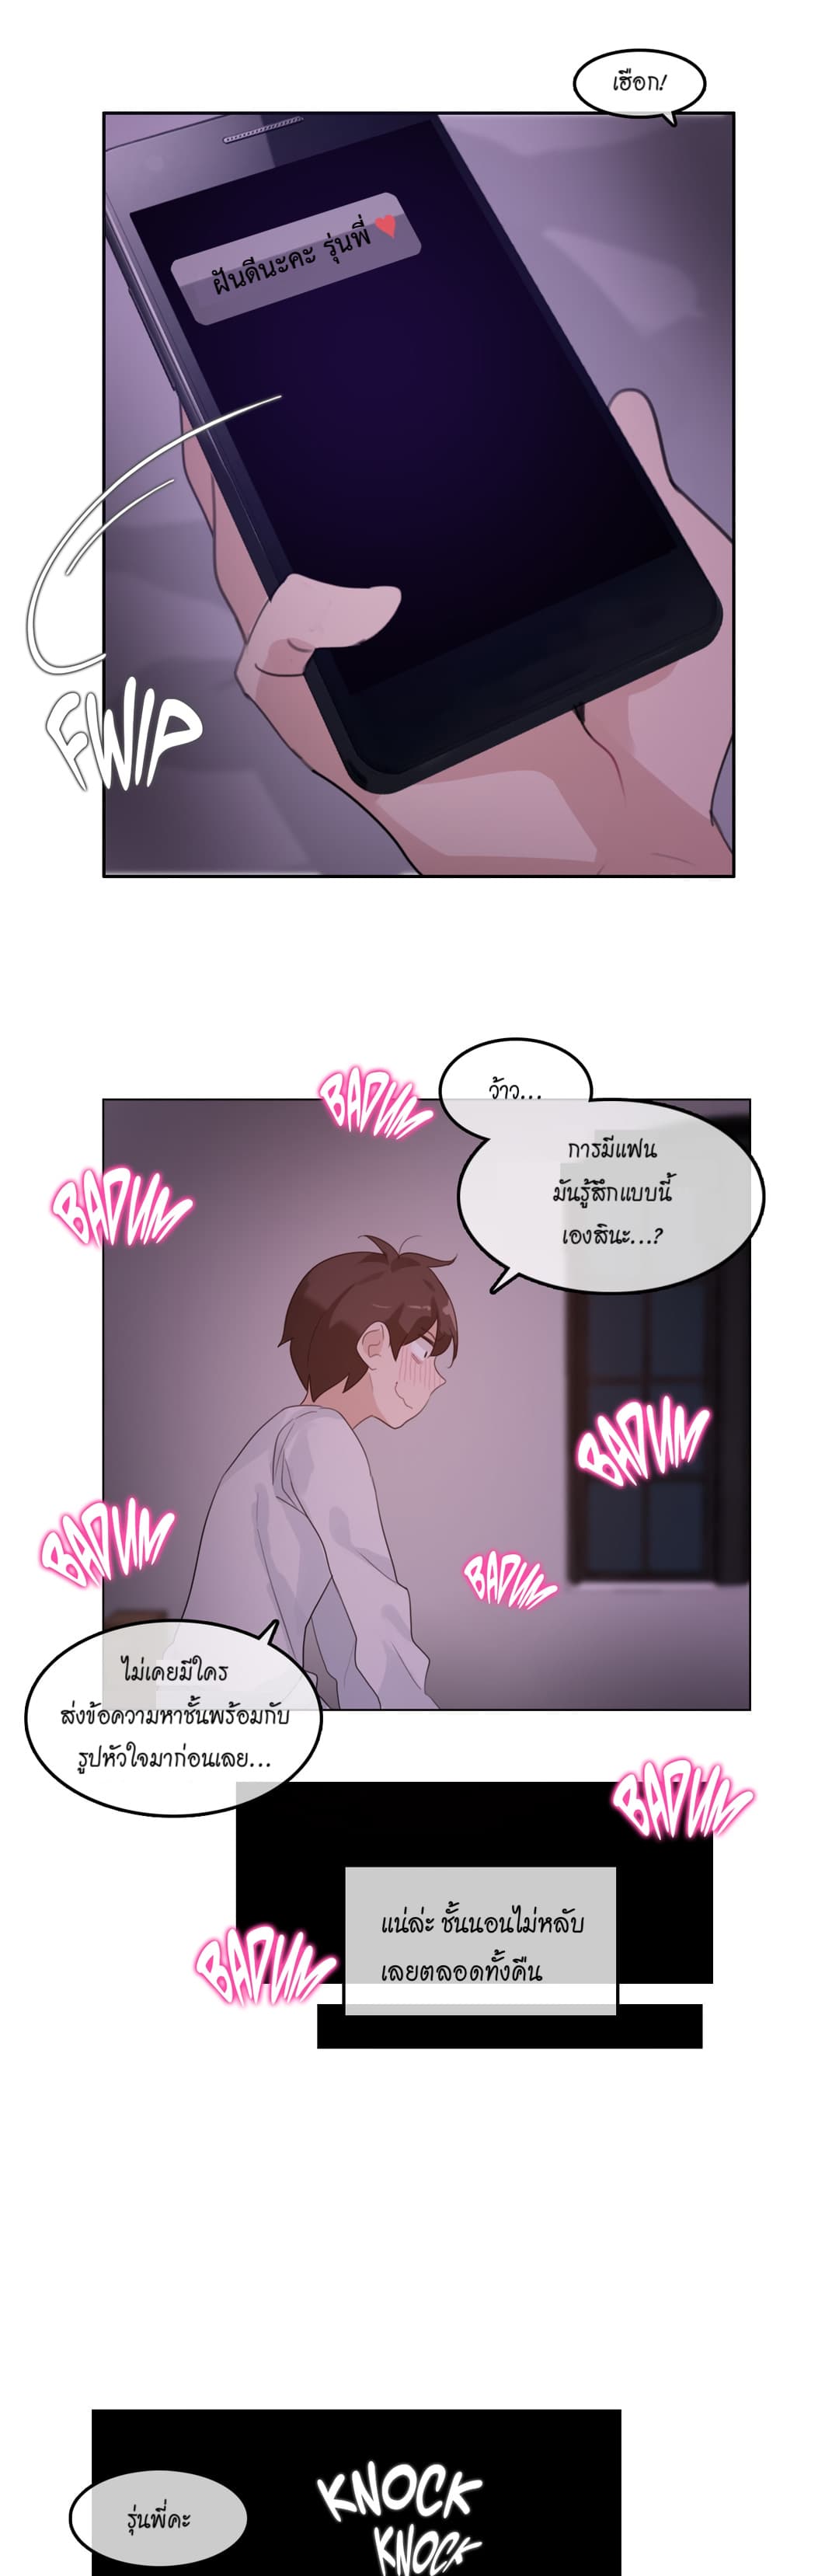 A Pervert’s Daily Life 28 (12)